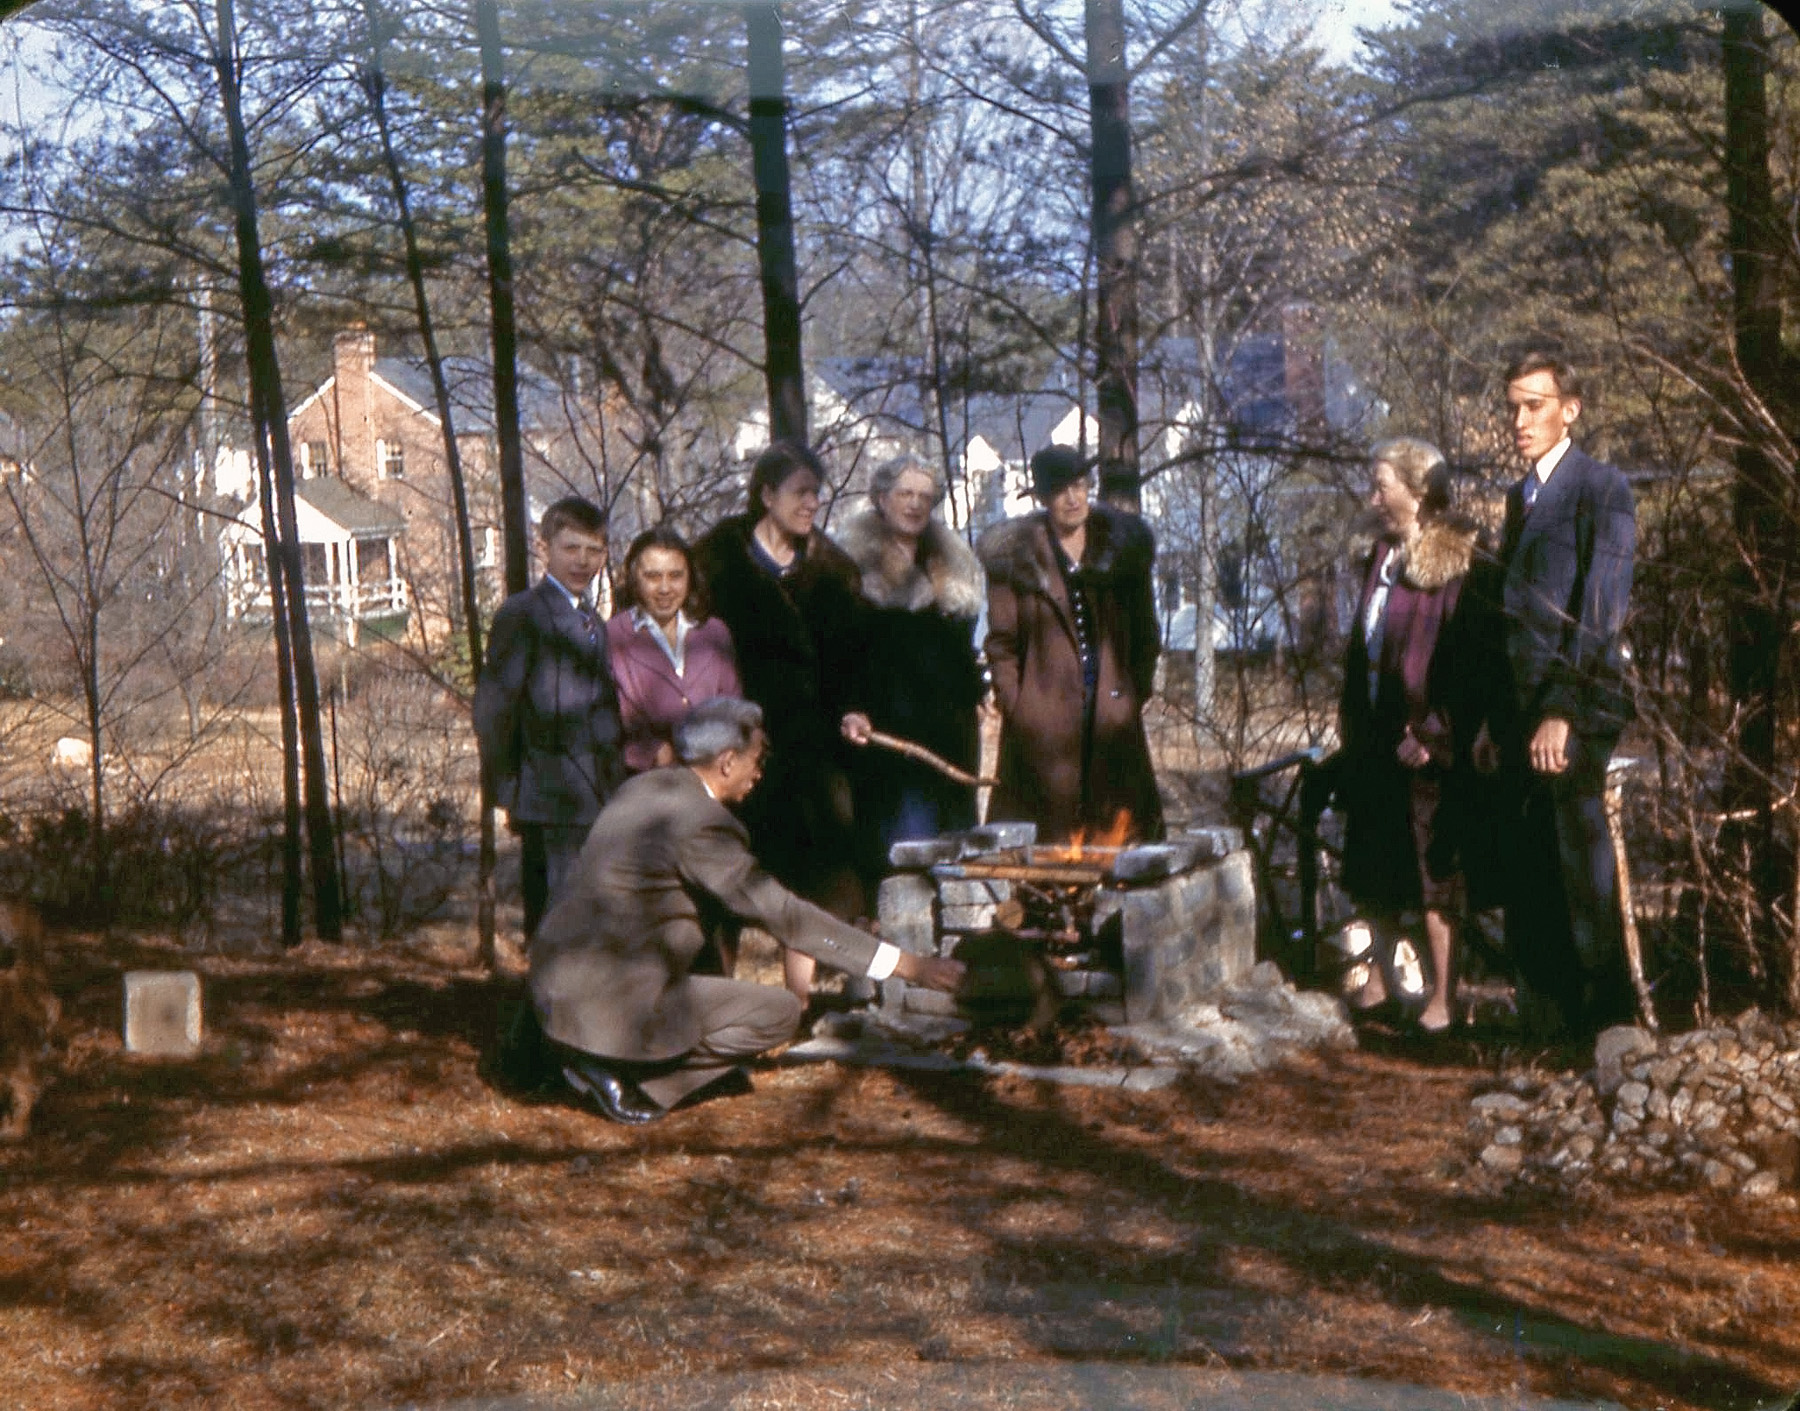 Autumn of 1941 at Uncle Carp's, North Chevy Chase, Maryland. People are Bobby Carpenter (me), cousin Harriet Carpenter, Margaret (Johnson) Carpenter, Aunt Esther Johnson, Grandmother Johnson, Aunt Florence Carpenter, cousin Frank Carpenter. Charles (Uncle Carp) Carpenter kneeling at fire. View full size.